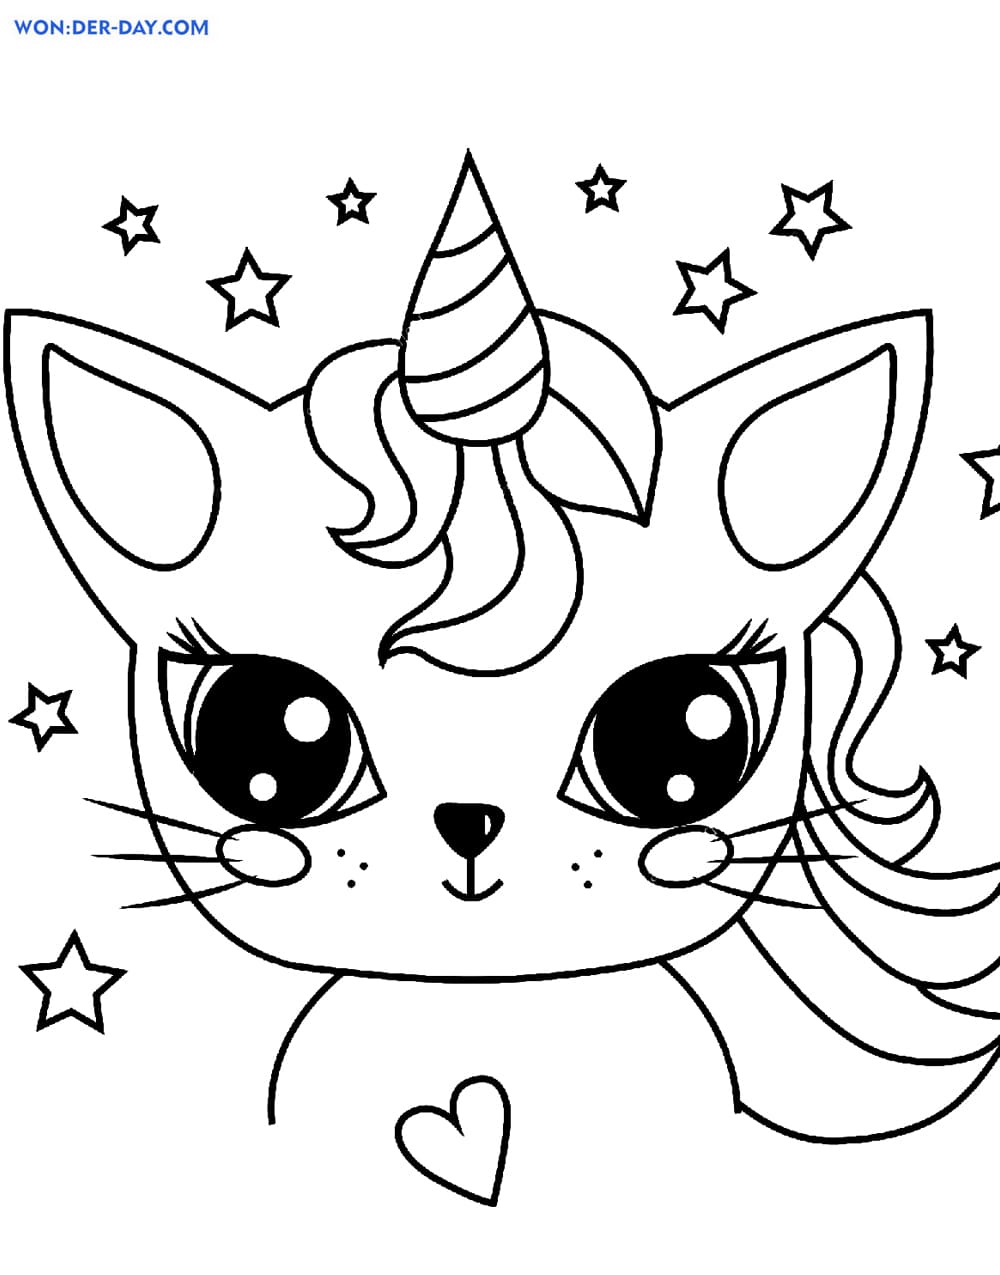 Unicorn Cat Coloring Pages   Free Coloring Pages